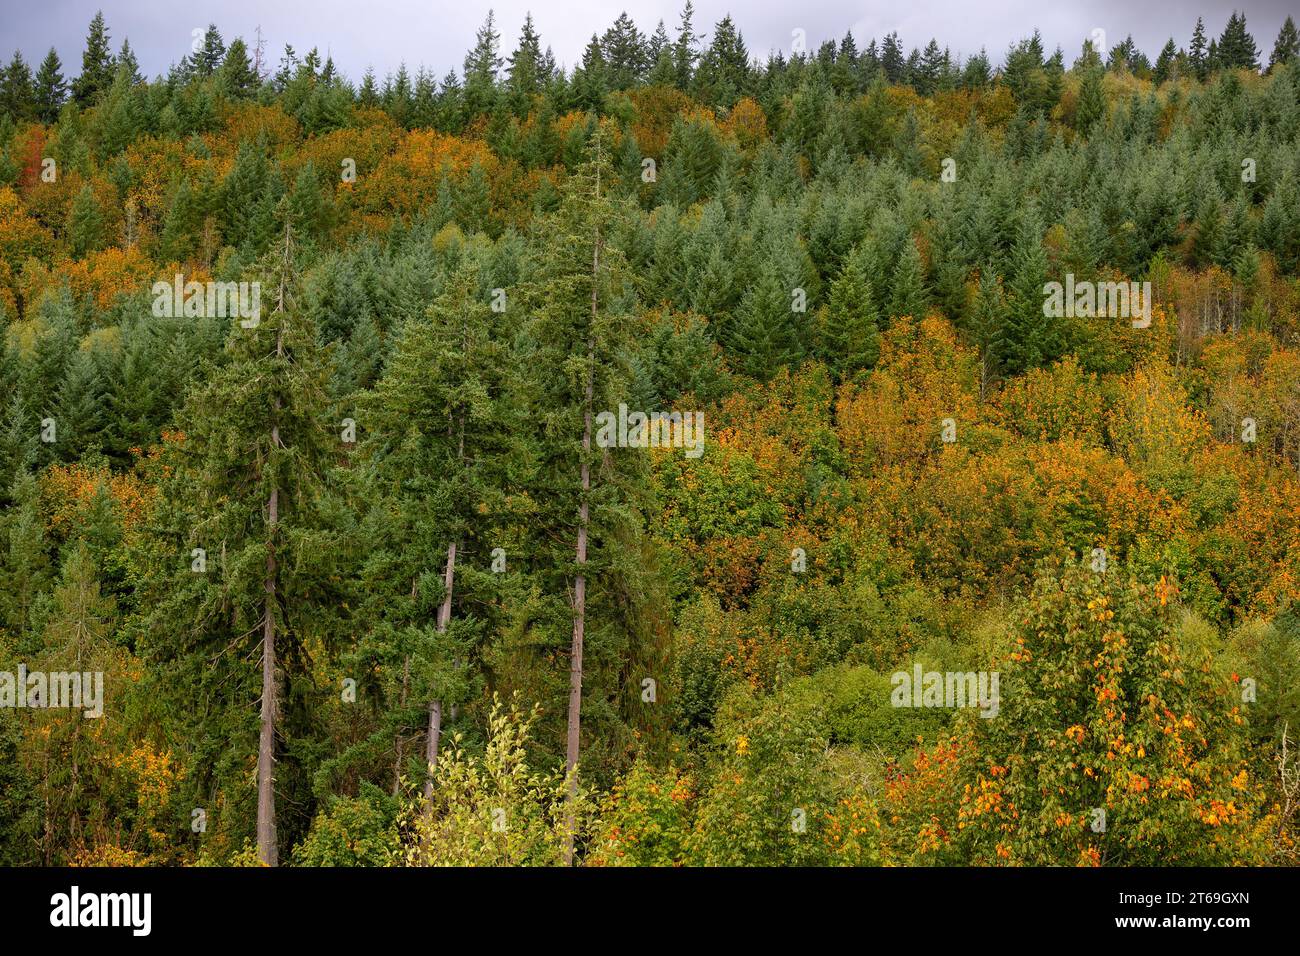 Fall colors mixed with evergreen trees in the forest landscape located in Washington State Cascade Mountain Range. Stock Photo